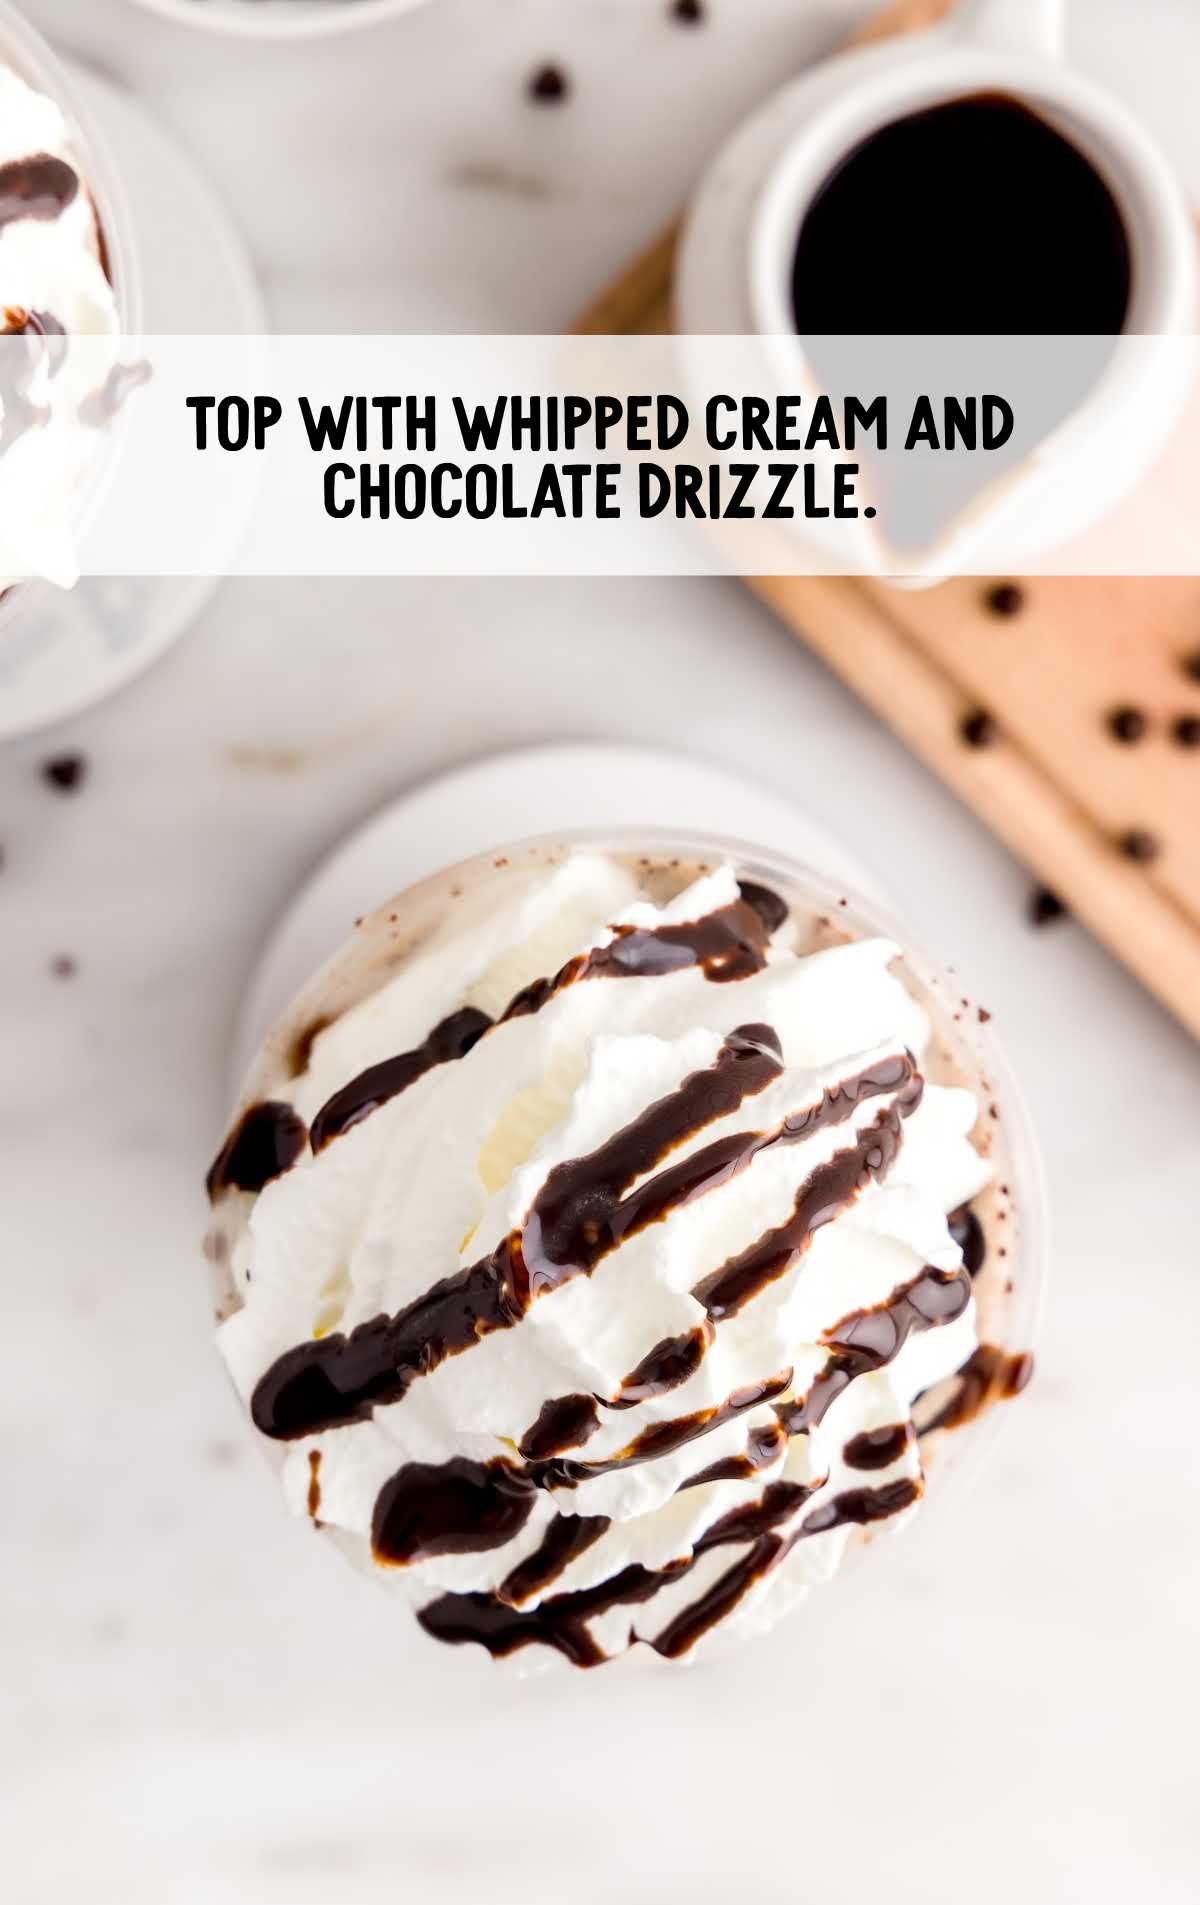 Double Chocolate Chip Frappuccino topped with whipped cream and chocolate drizzle